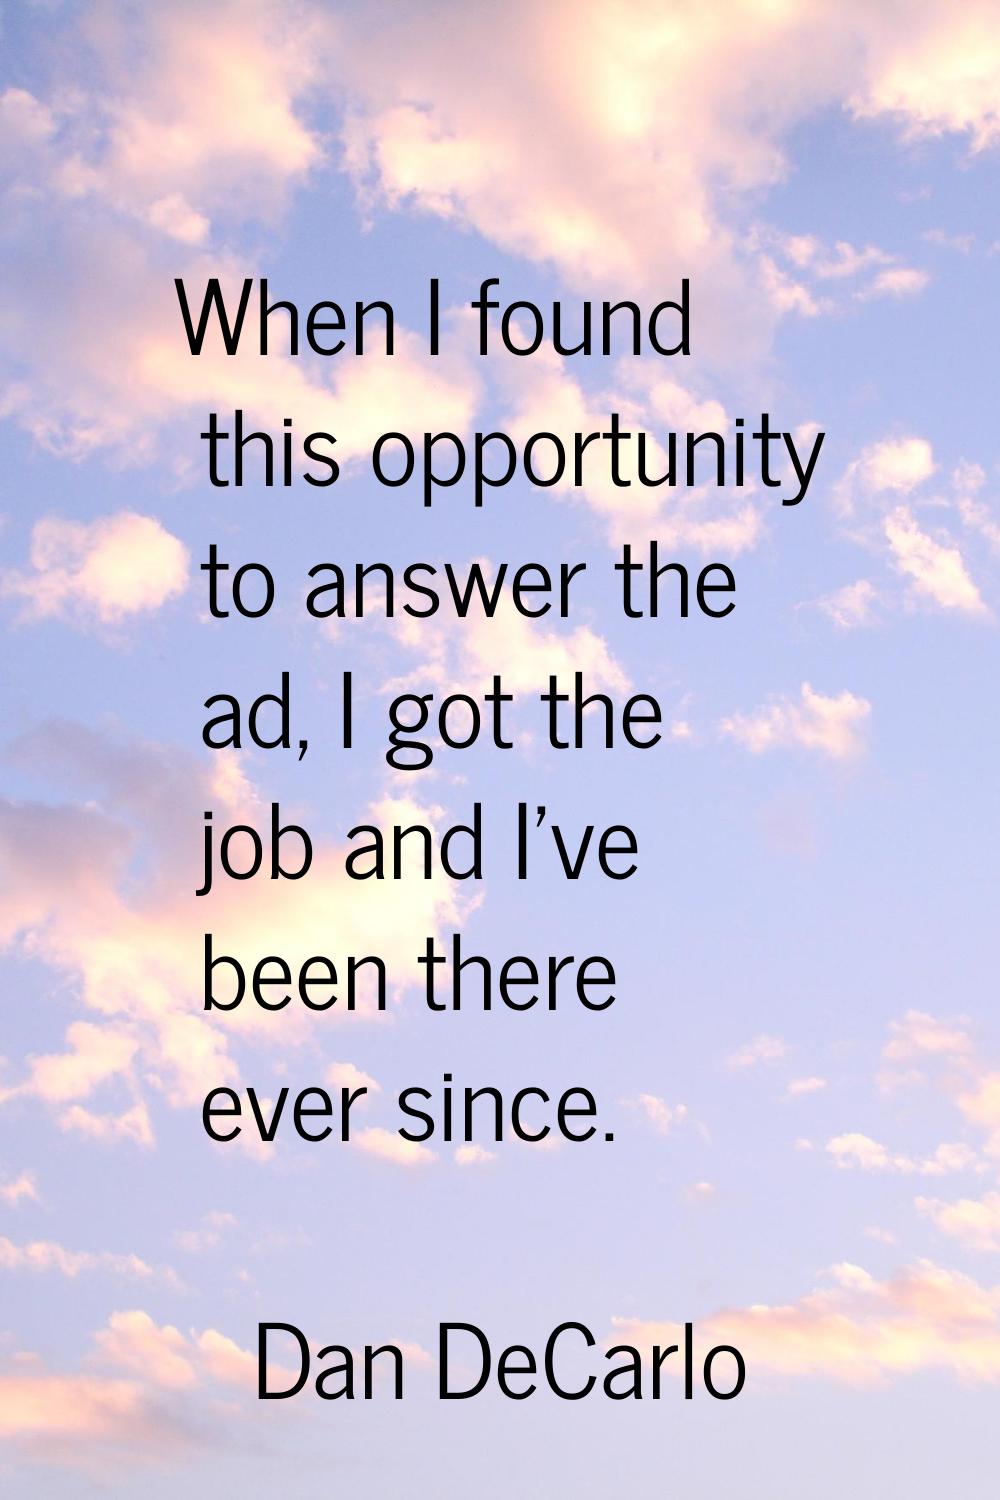 When I found this opportunity to answer the ad, I got the job and I've been there ever since.